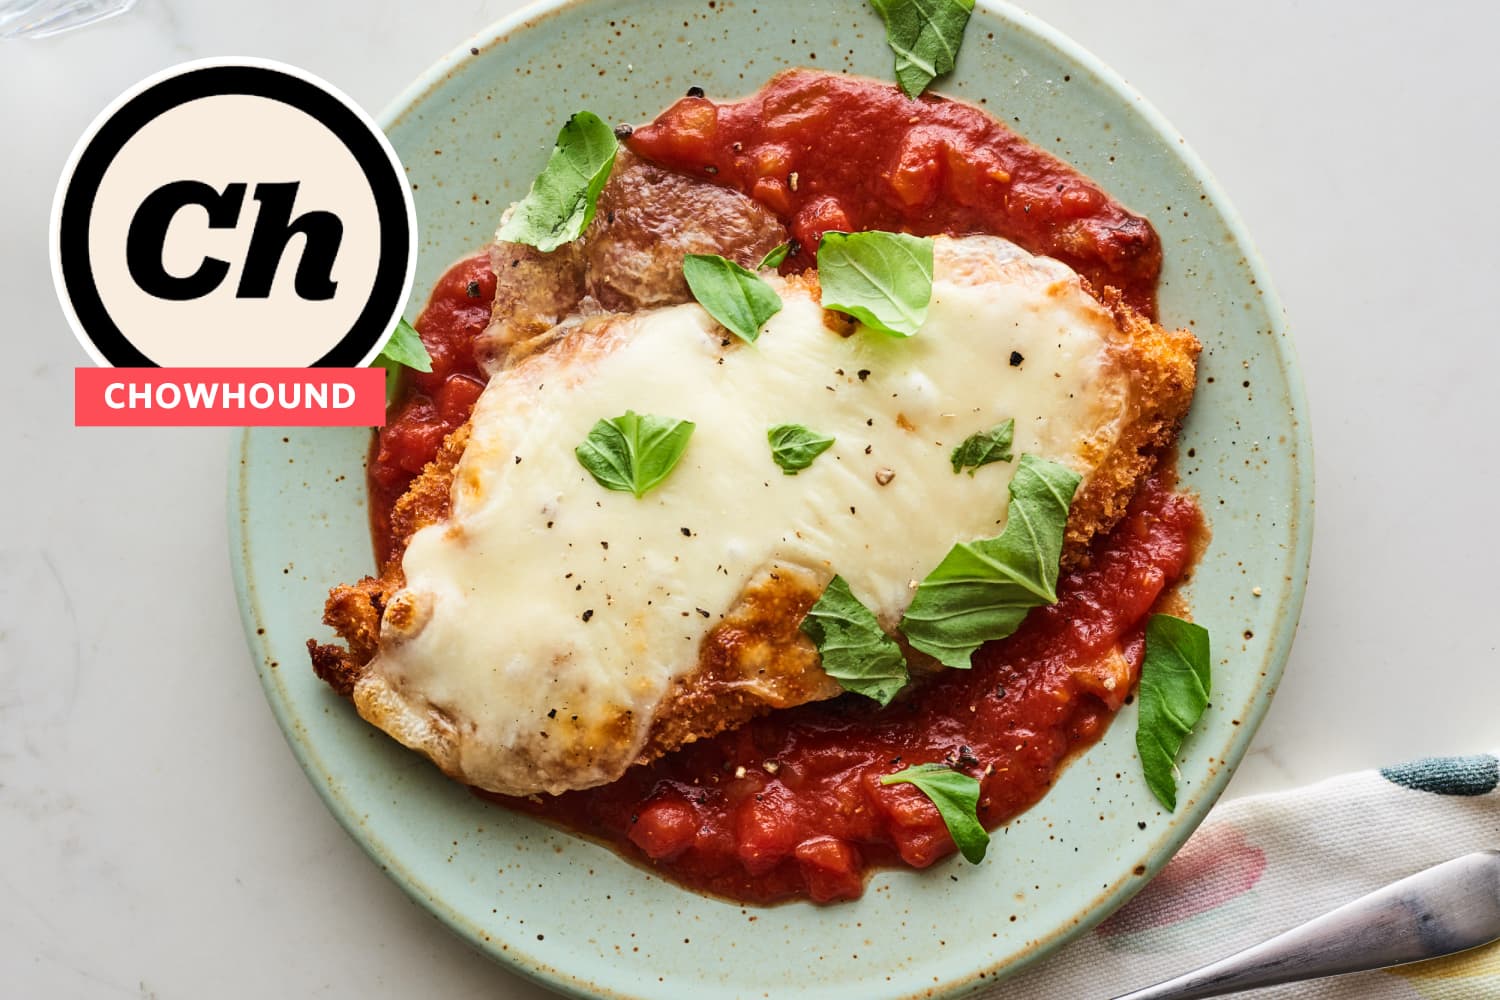 I Tried Chowhound's Chicken Parmesan Recipe | The Kitchn